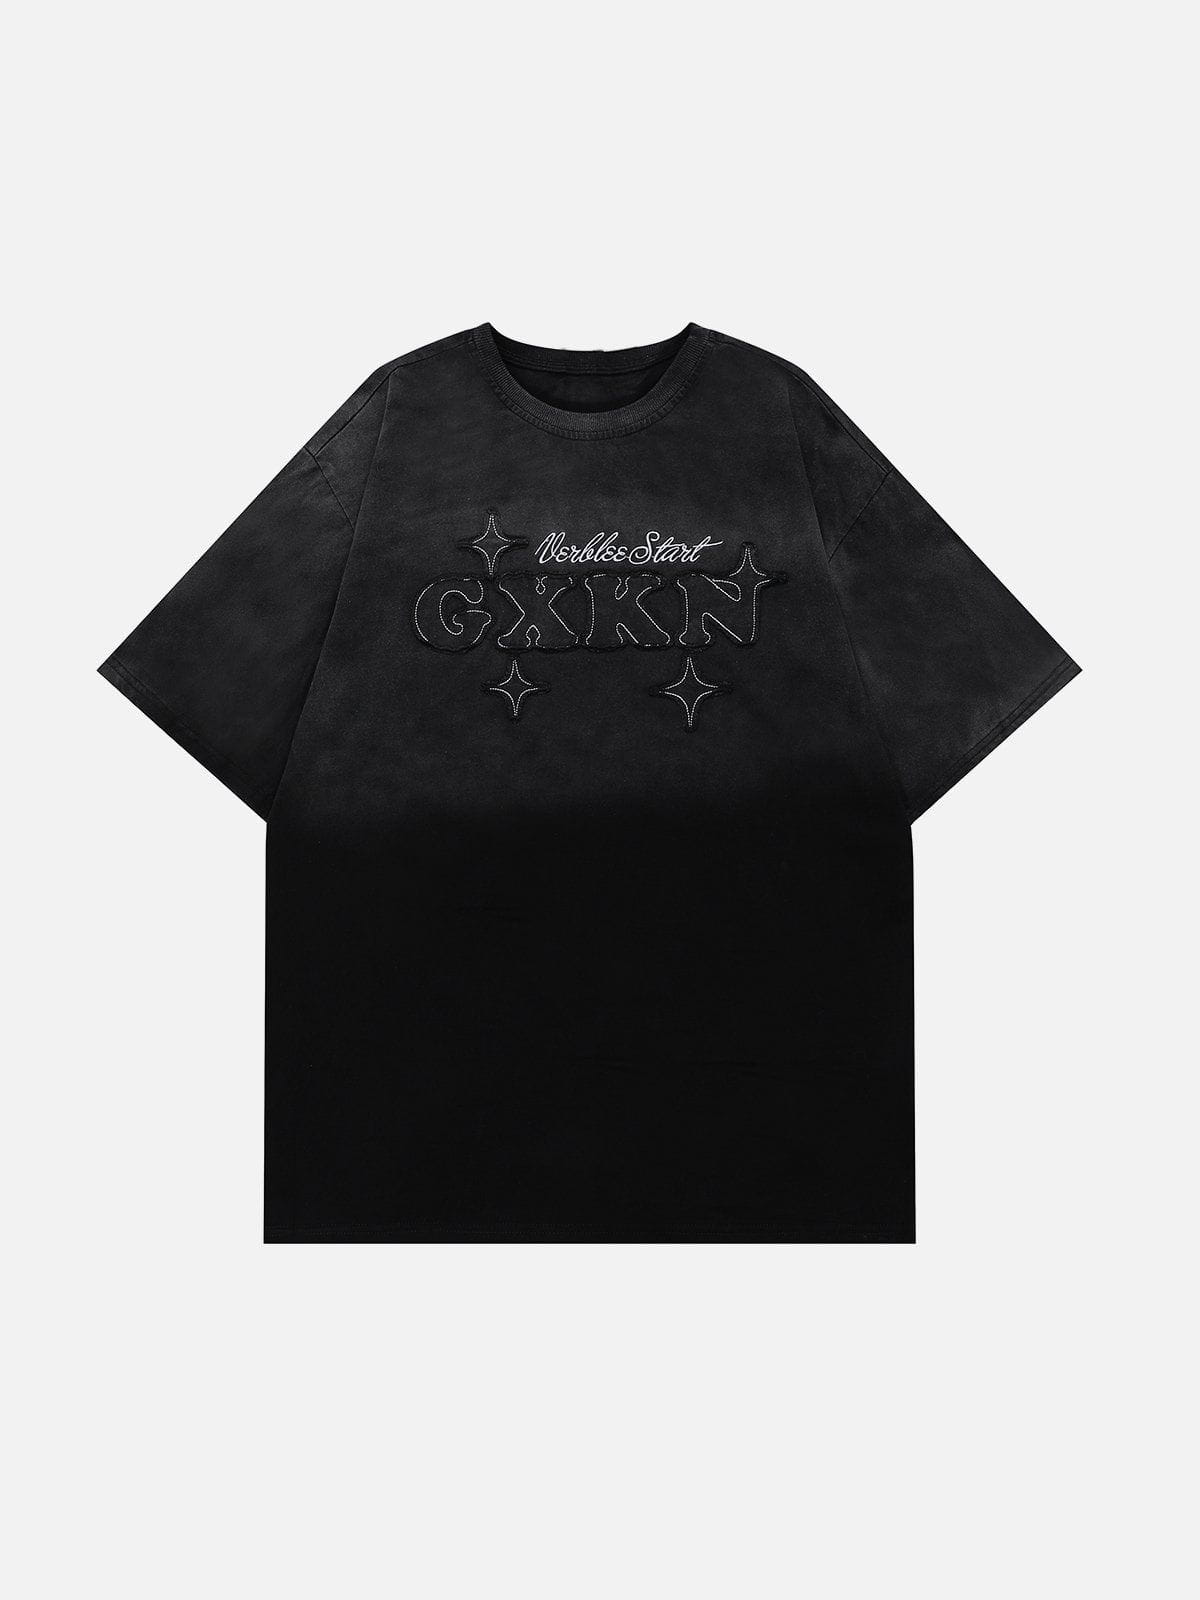 Sneakerland™ - Applique Embroidery Gradient Star Tee